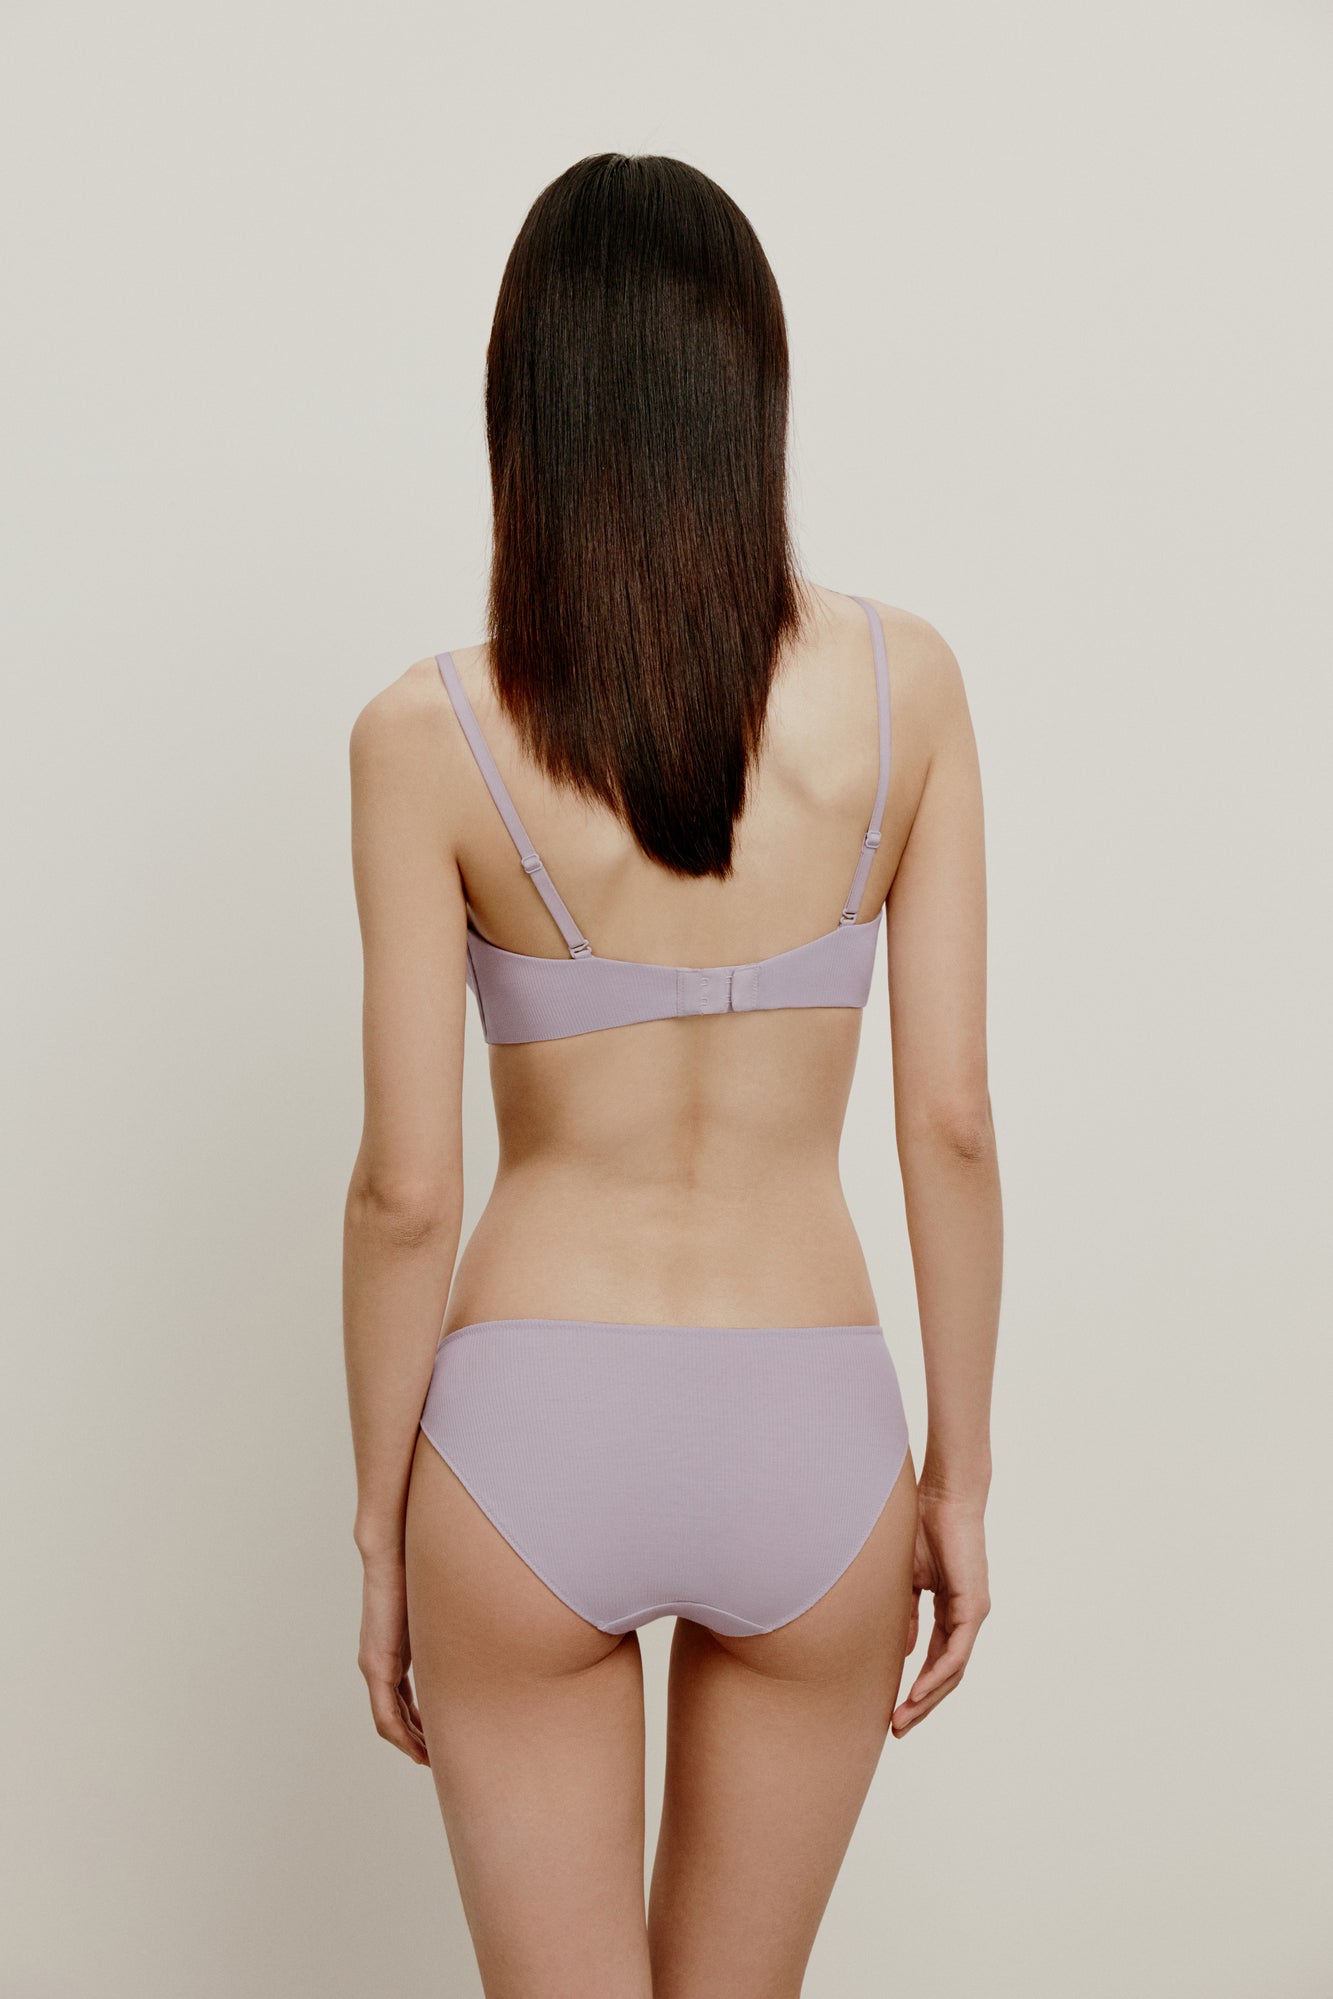 back of woman in light purple bra and brief